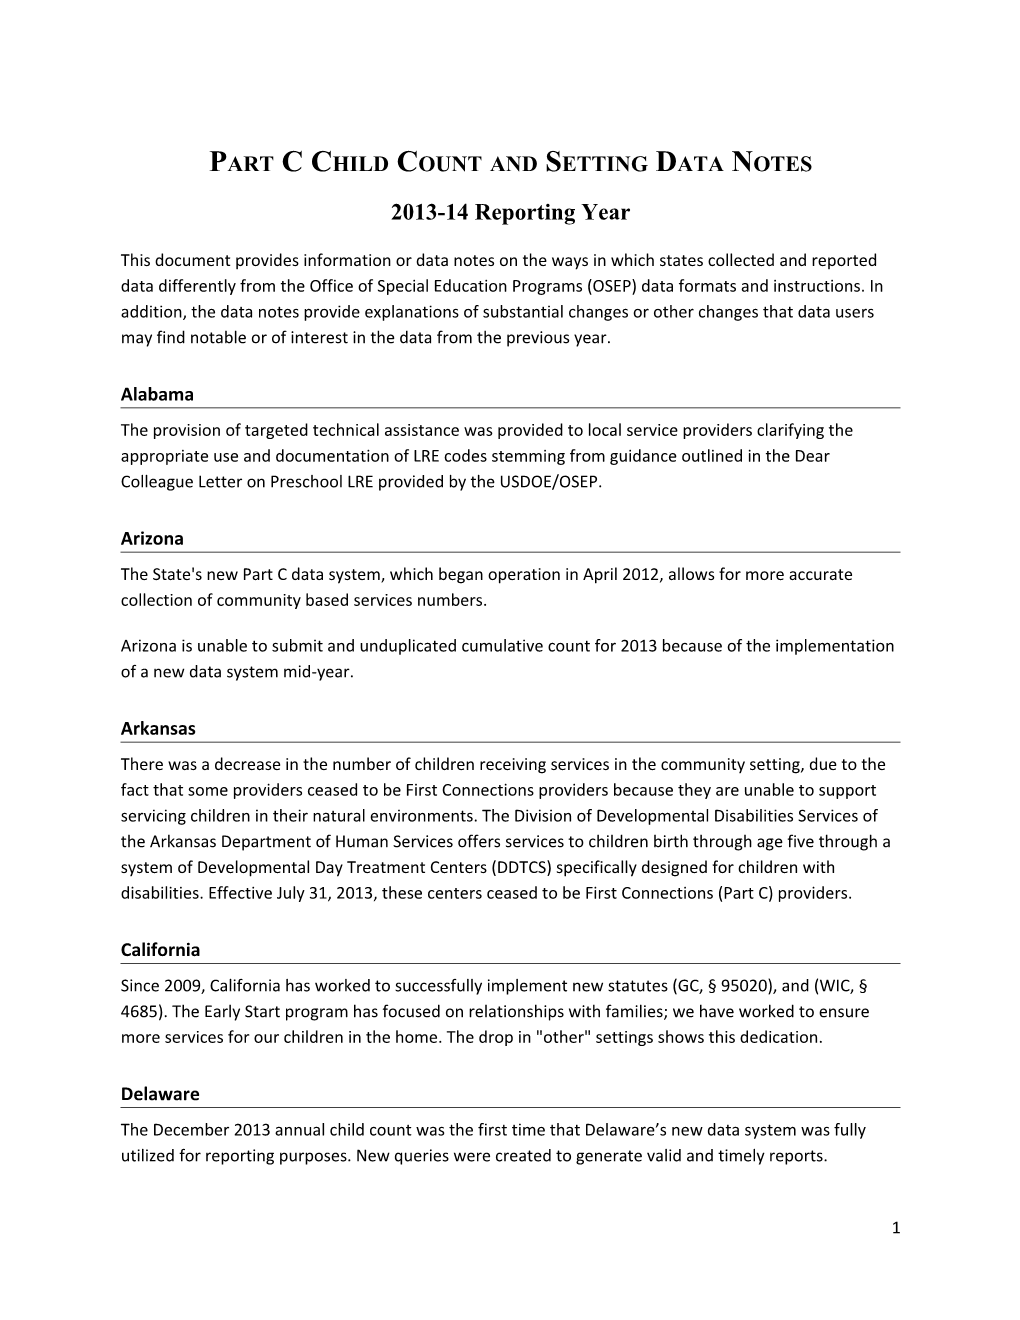 Part Cchild Count and Setting Data Notes